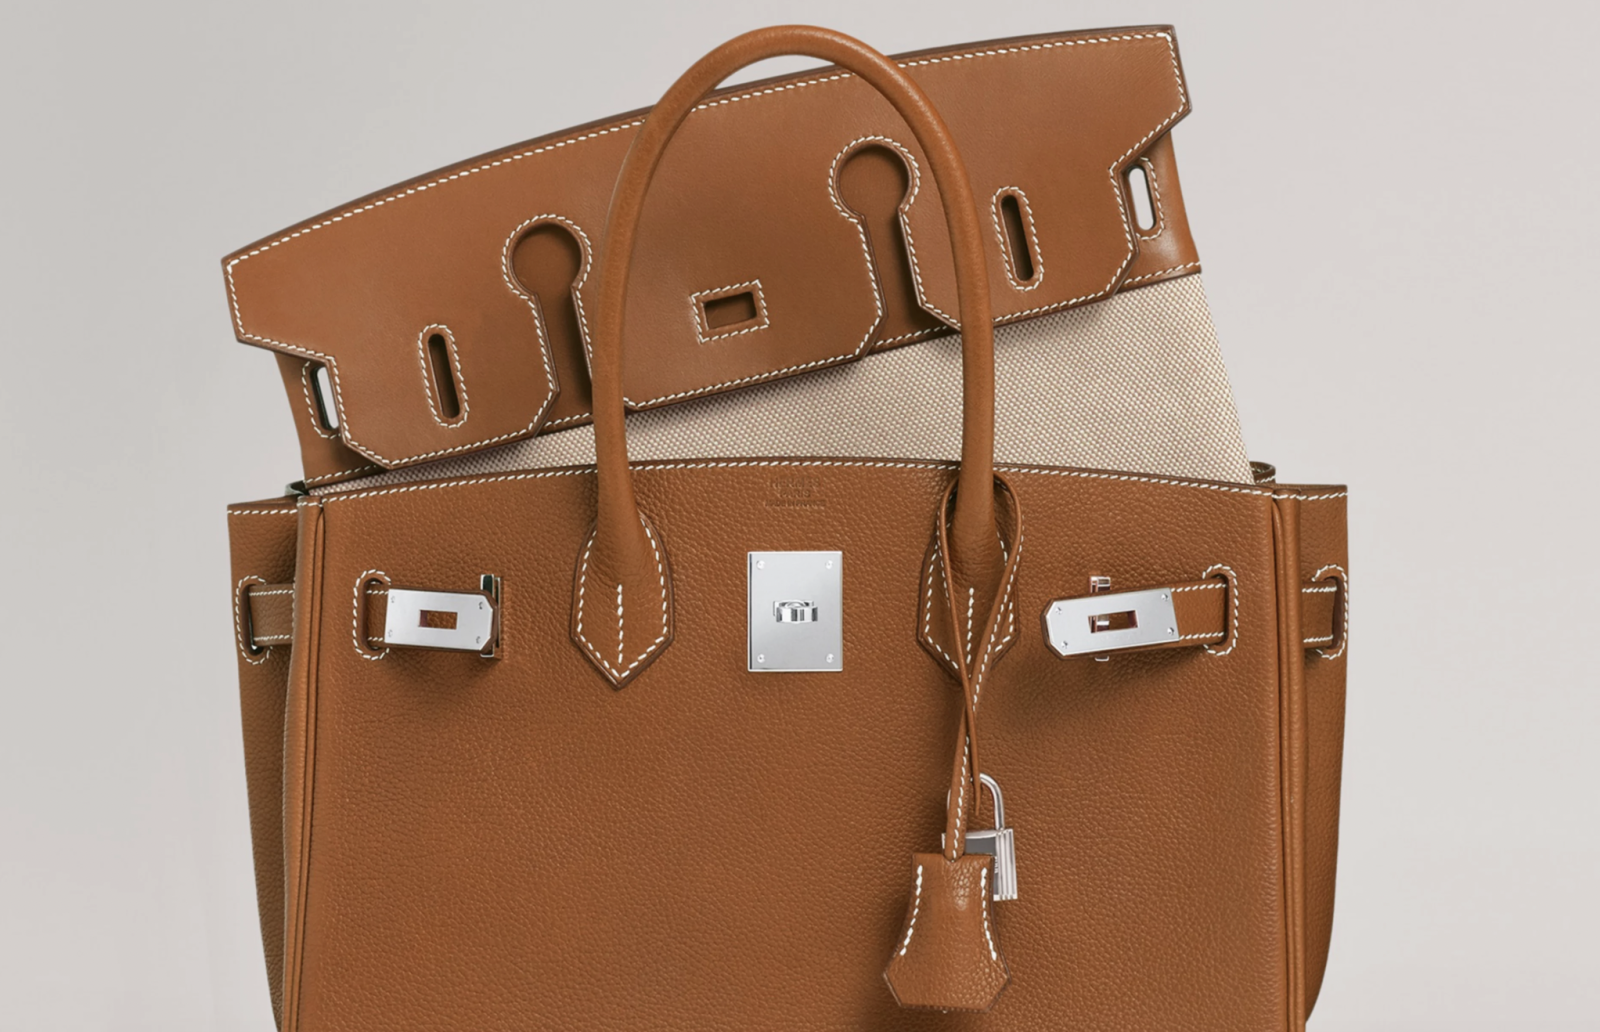 Hermes Bags: Styles, Prices, And Why They Are So Expensive